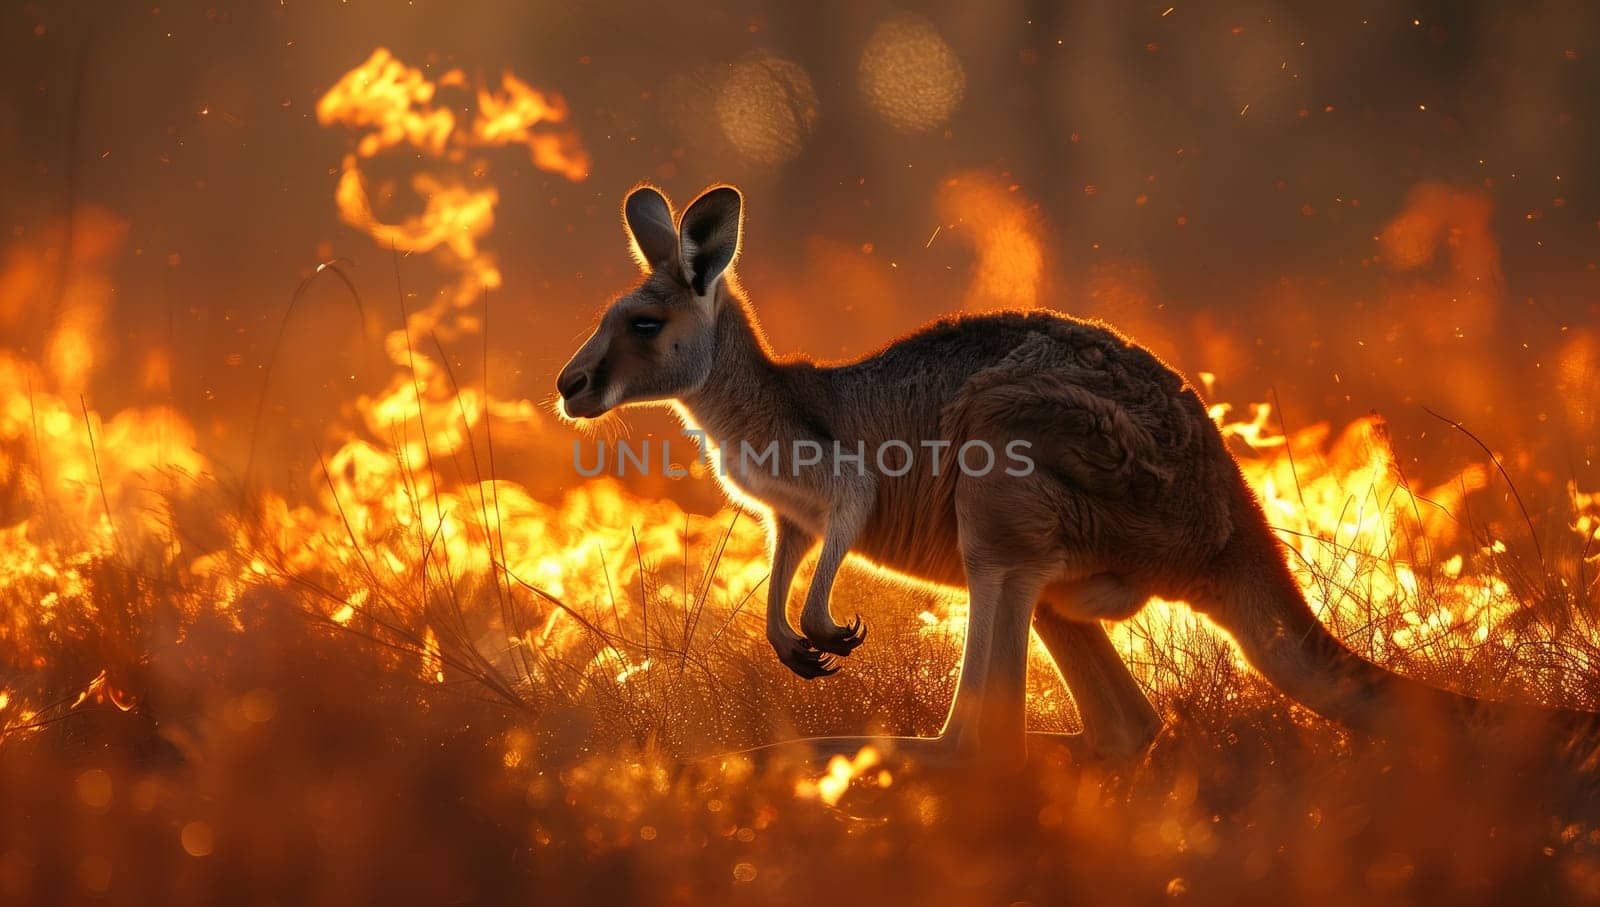 A fawn kangaroo hops through the grassland, its tail bouncing in the darkness by richwolf